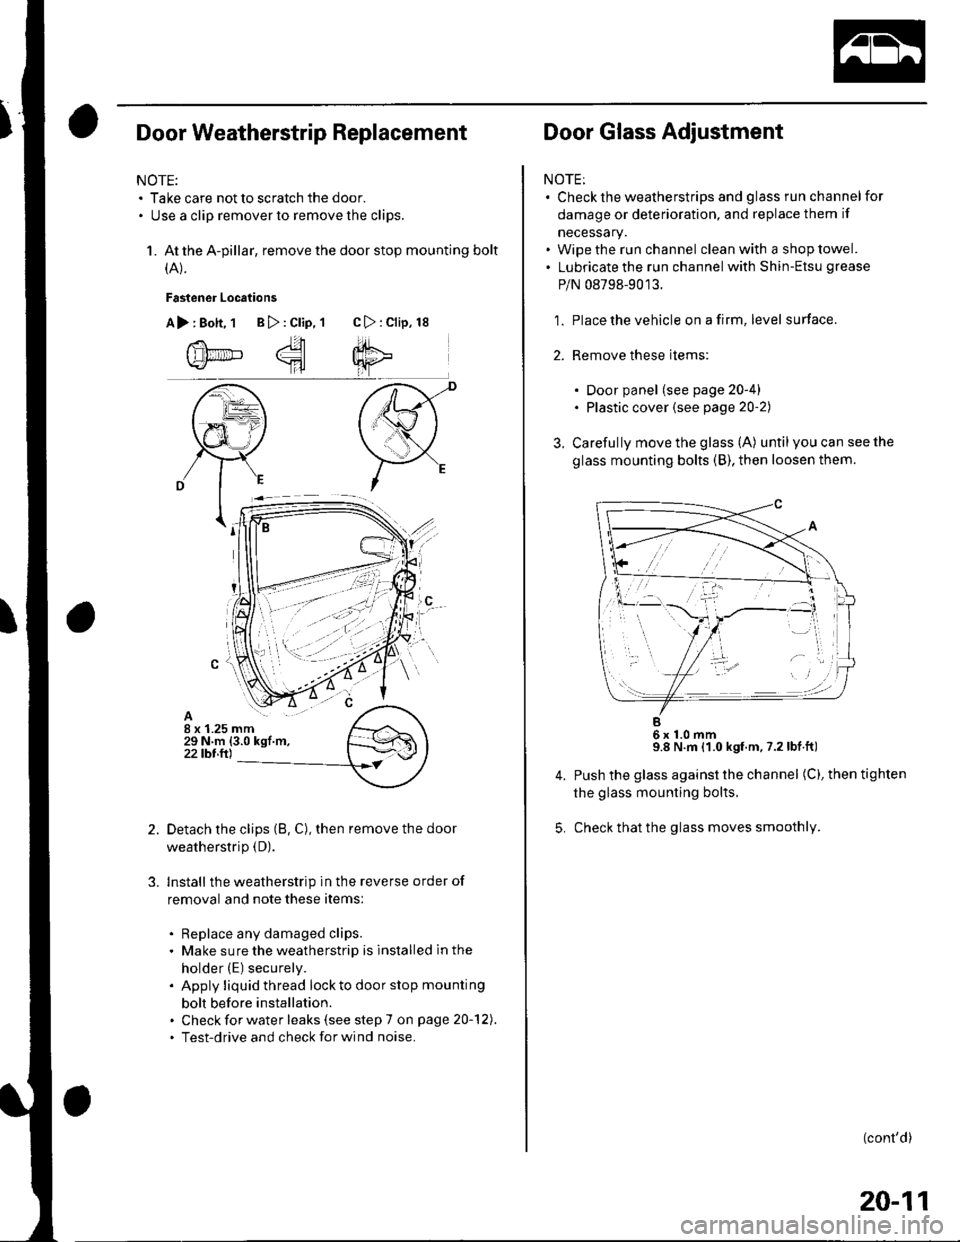 HONDA CIVIC 2003 7.G Workshop Manual Door Weatherstrip Replacement
NOTE:. Take care not to scratch the door.. Use a clip remover to remove the clips.
1. At the A-pillar, remove the door stop mounting bolt
(A).
Fastener Locations
A>:Bott,